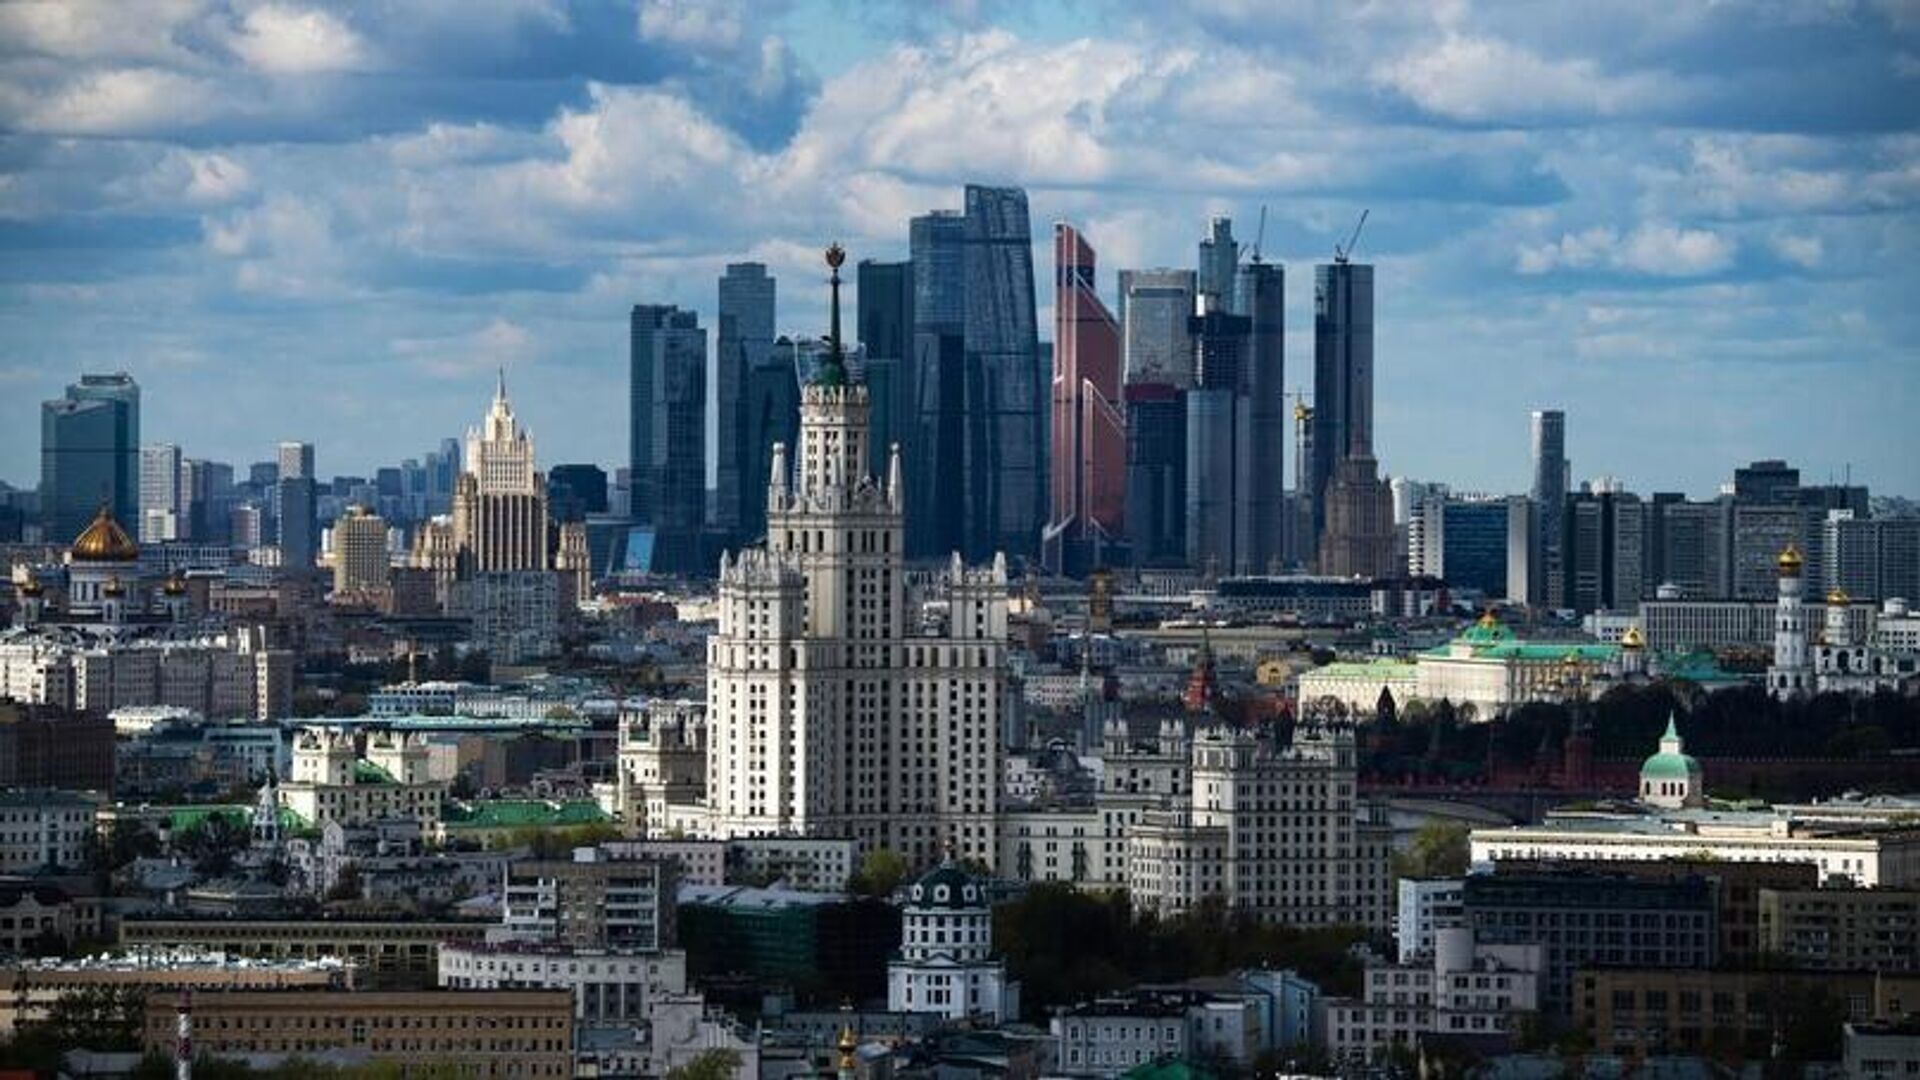 A general view shows the Soviet era skyscraper on Kotelnicheskaya Embankment of the Moskva river, Foreign ministry headquarters, Radisson Royal Hotel Moscow, the Christ the Savior cathedral and the Kremlin, with the Moscow International Business Centre, also known as Moskva-City, seen in te background, in Moscow, Russia - Sputnik International, 1920, 03.02.2022